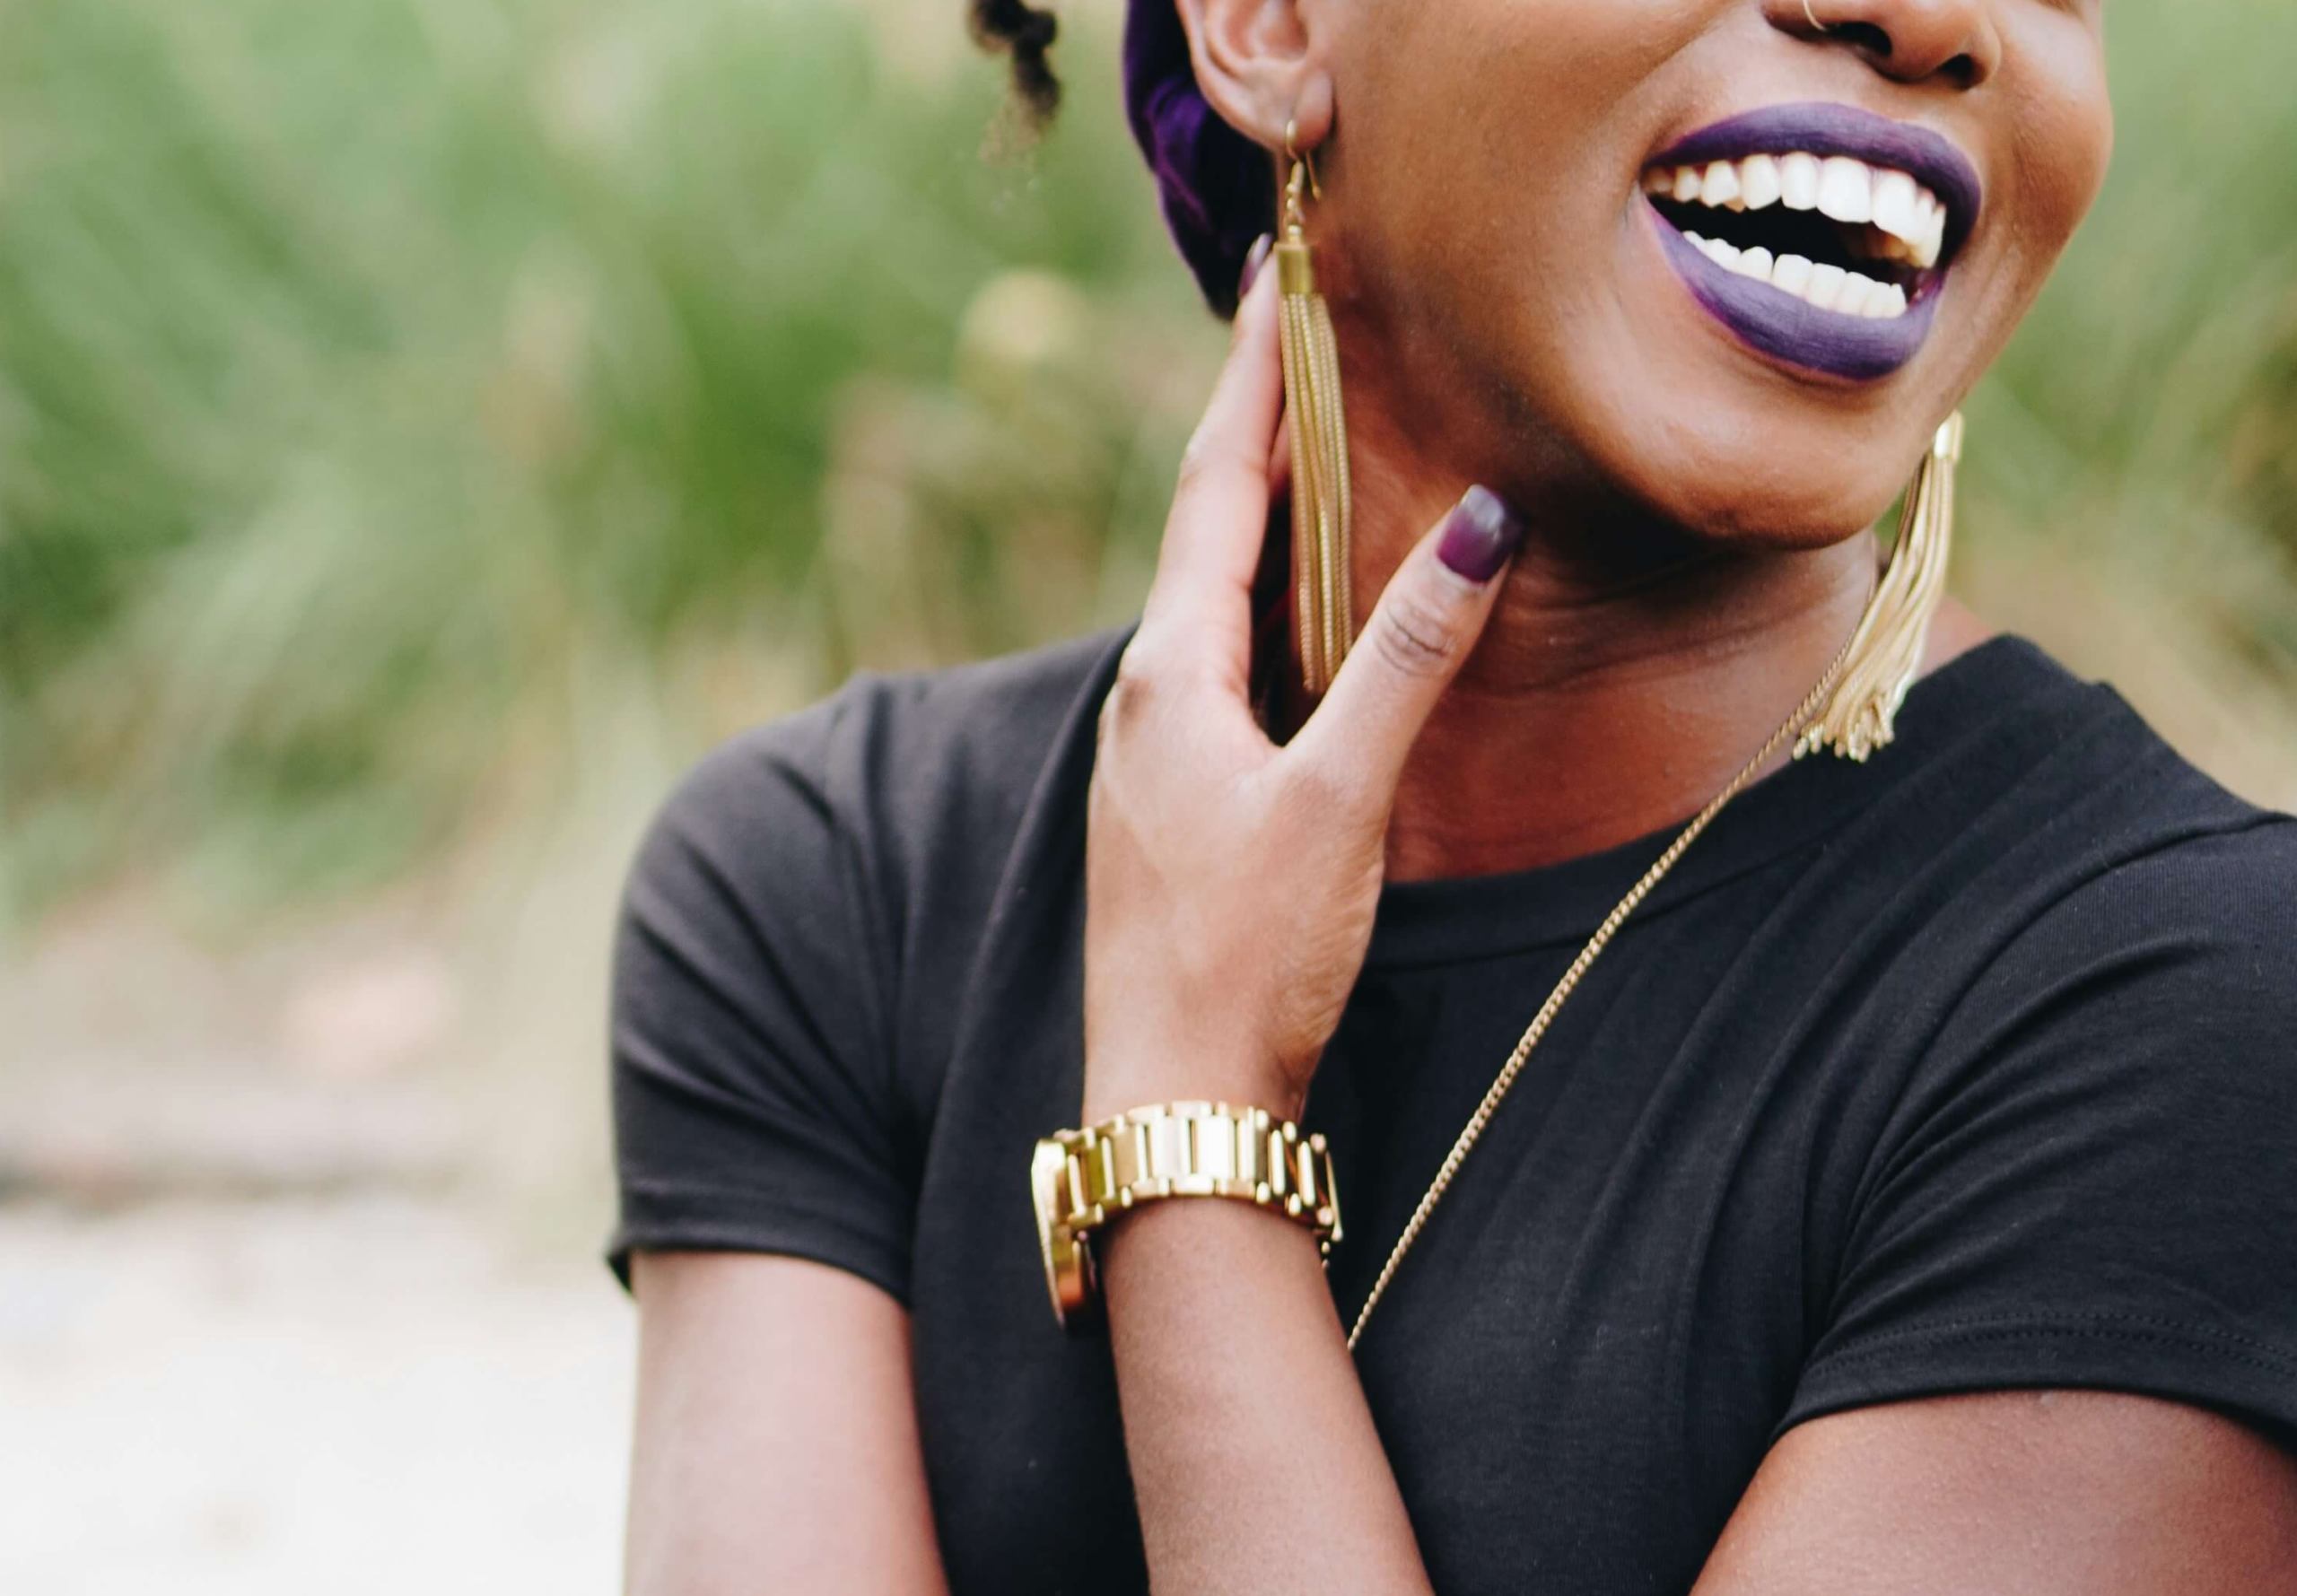 Image of a smiling African American woman wearing purple lipstick and standing outside. Relational trauma can be difficult to overcome, but with trauma therapy in Austin, TX you can learn healthy boundaries to protect yourself.